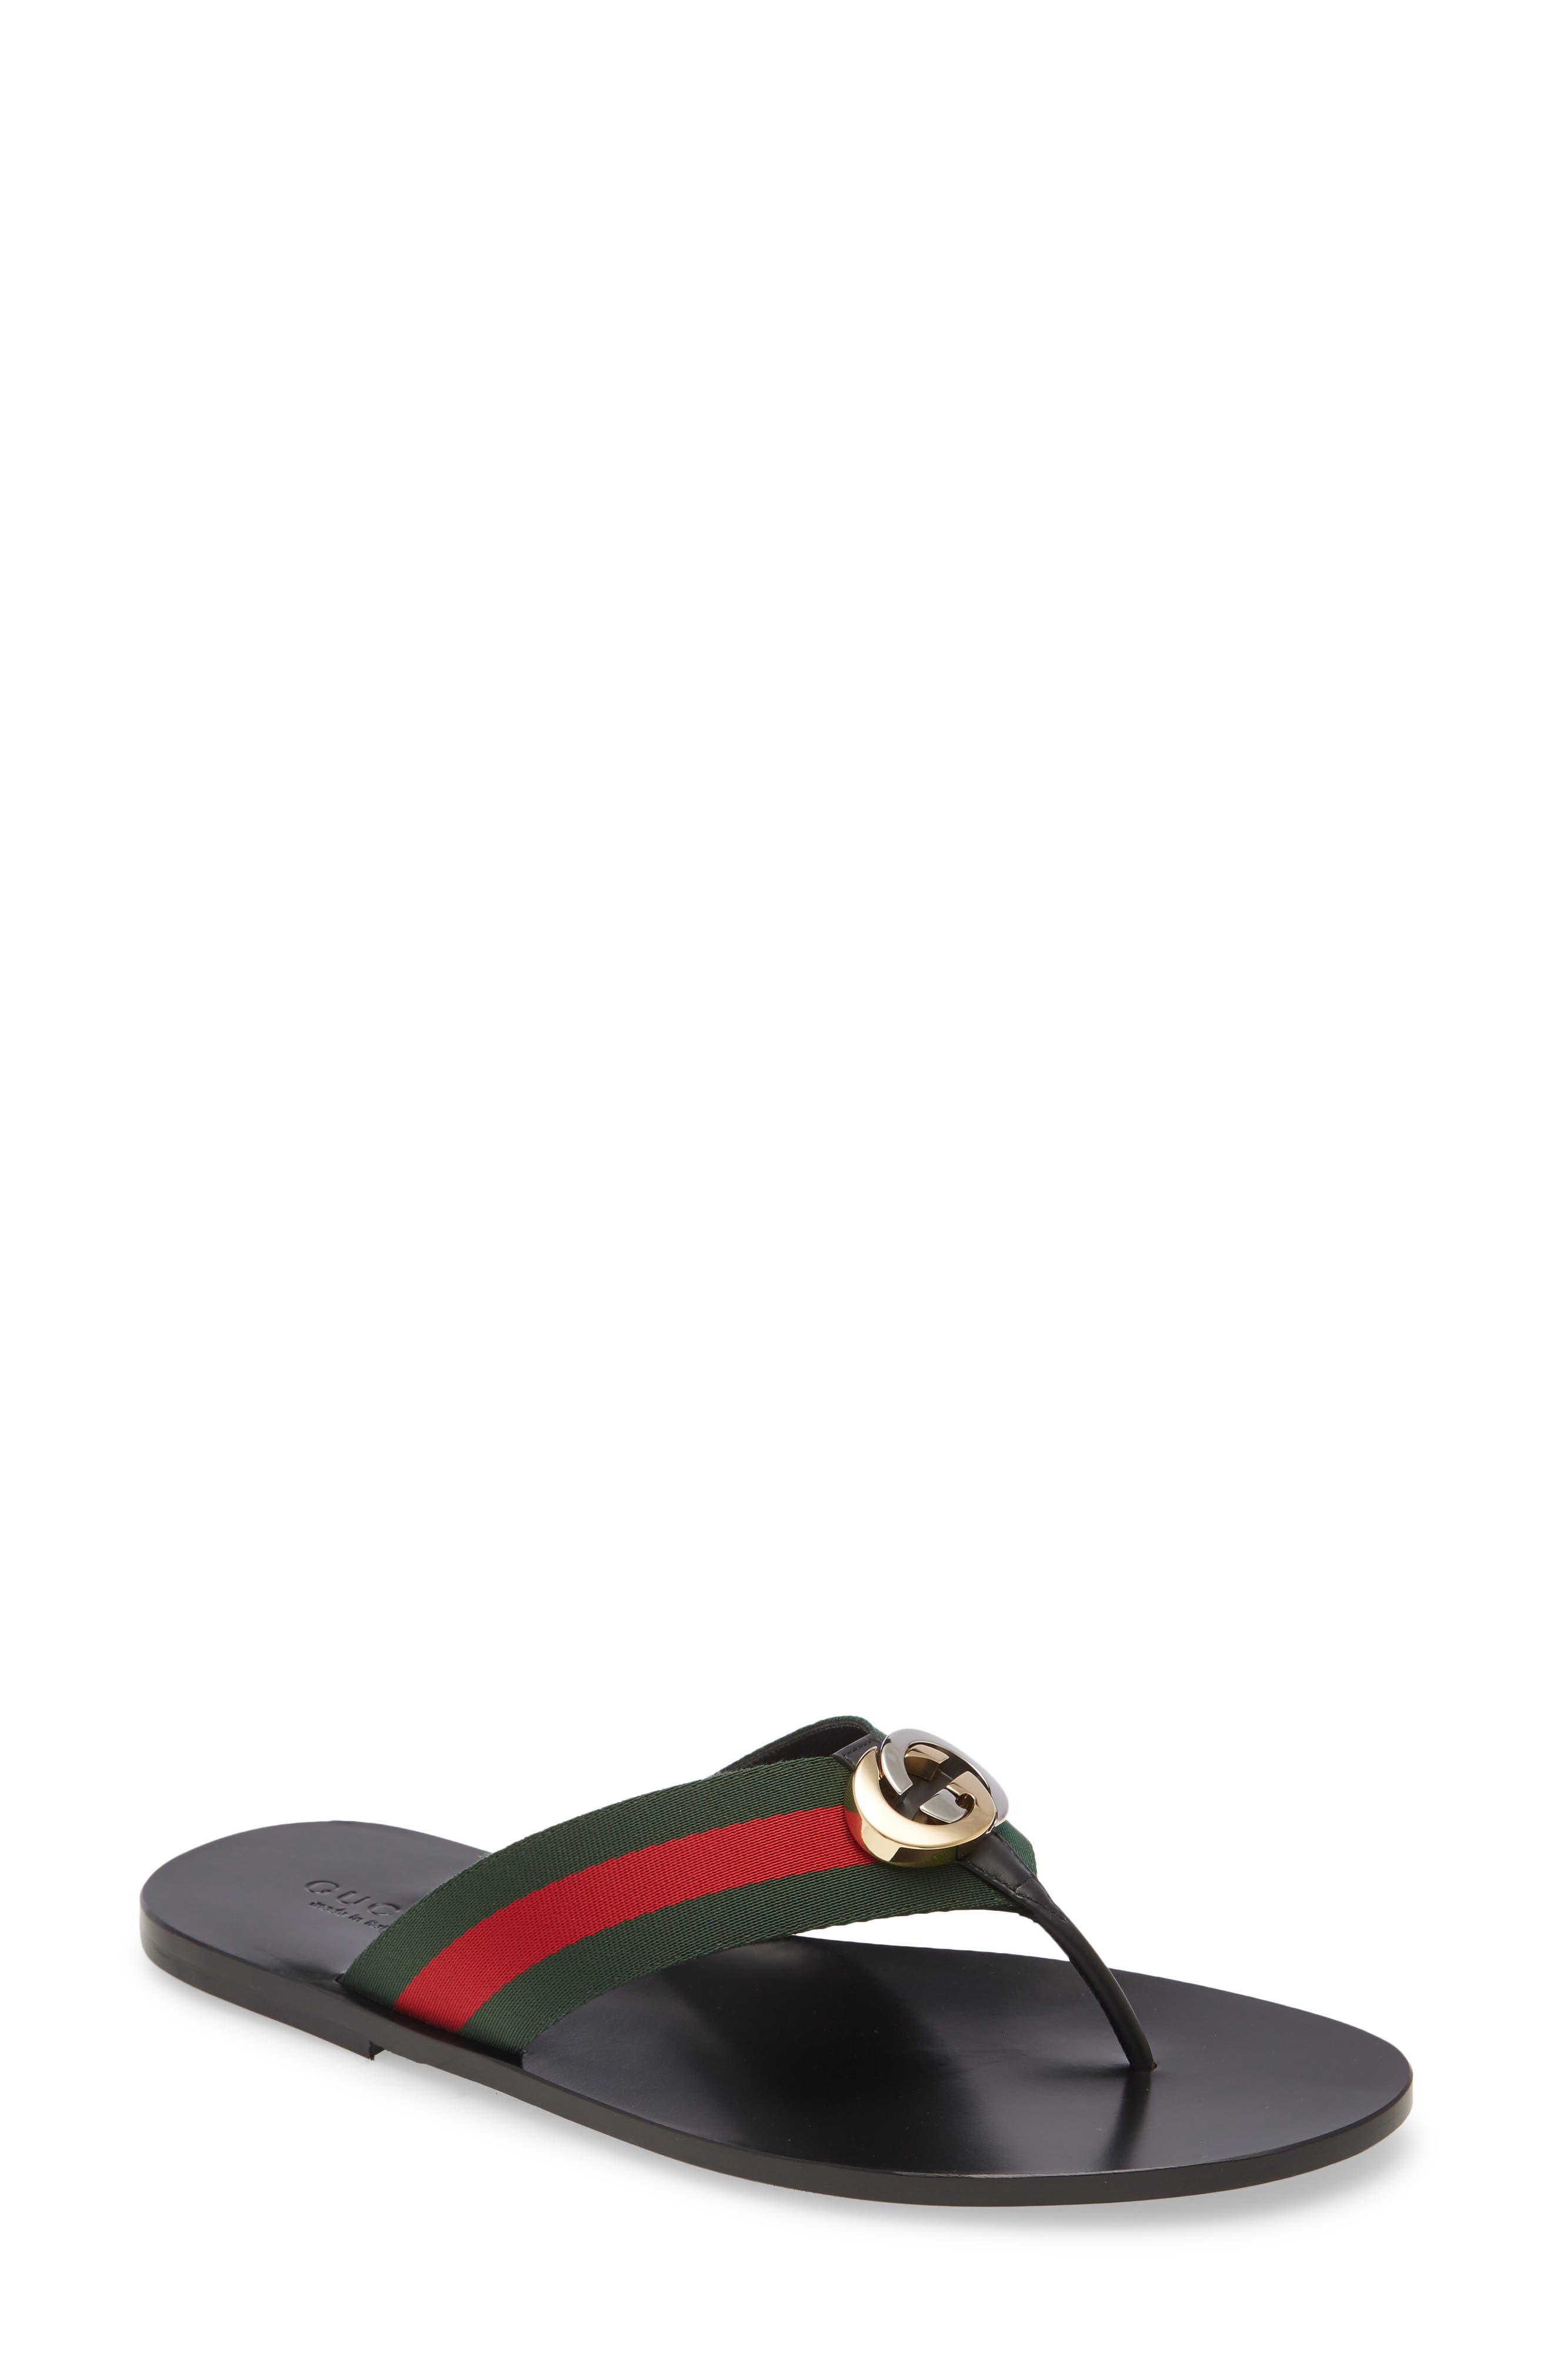 gucci flops price